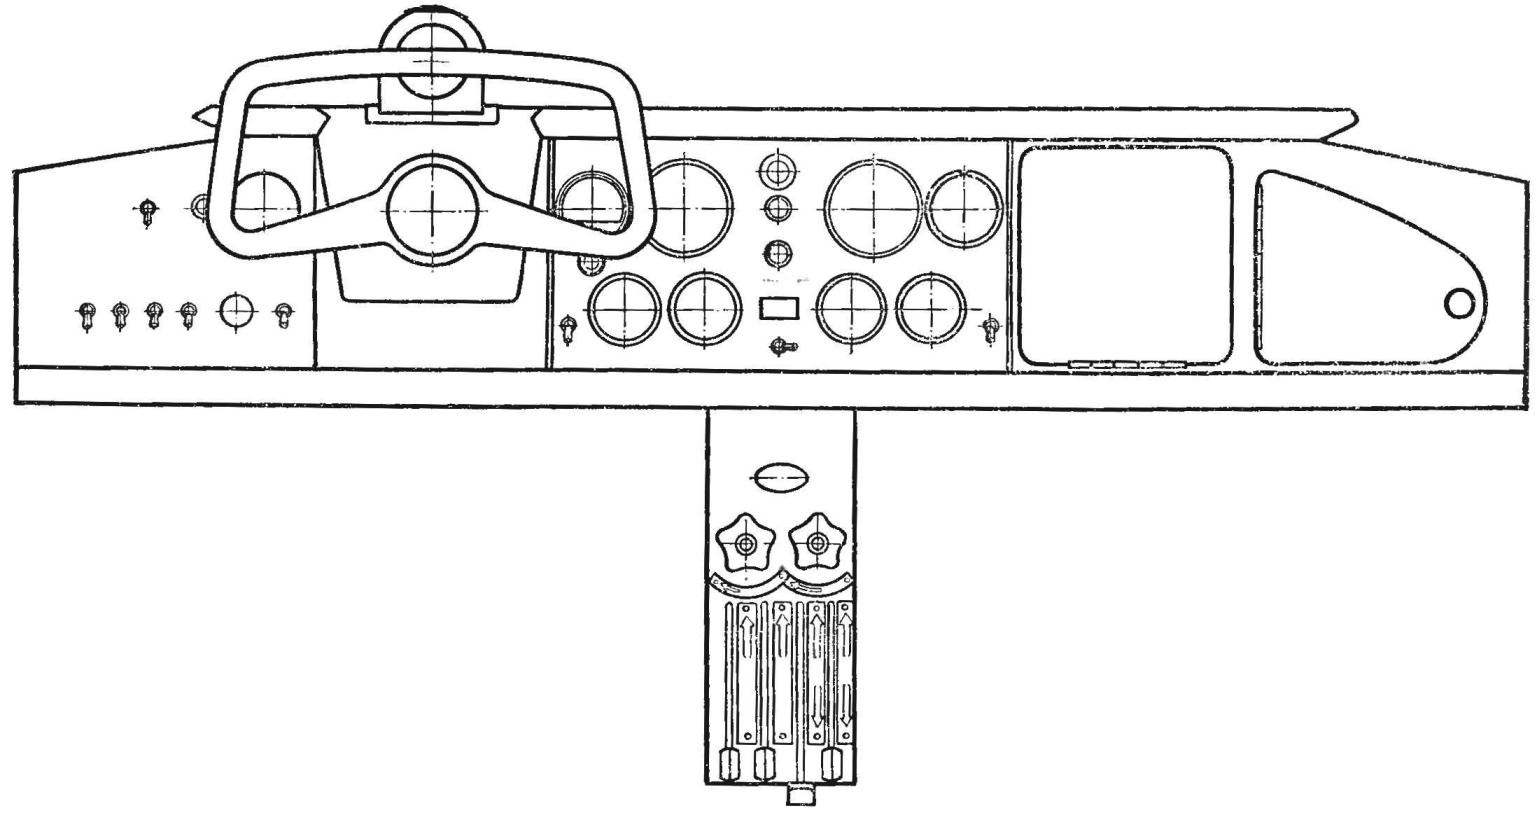 Fig. 4. Instrument panel and controls.